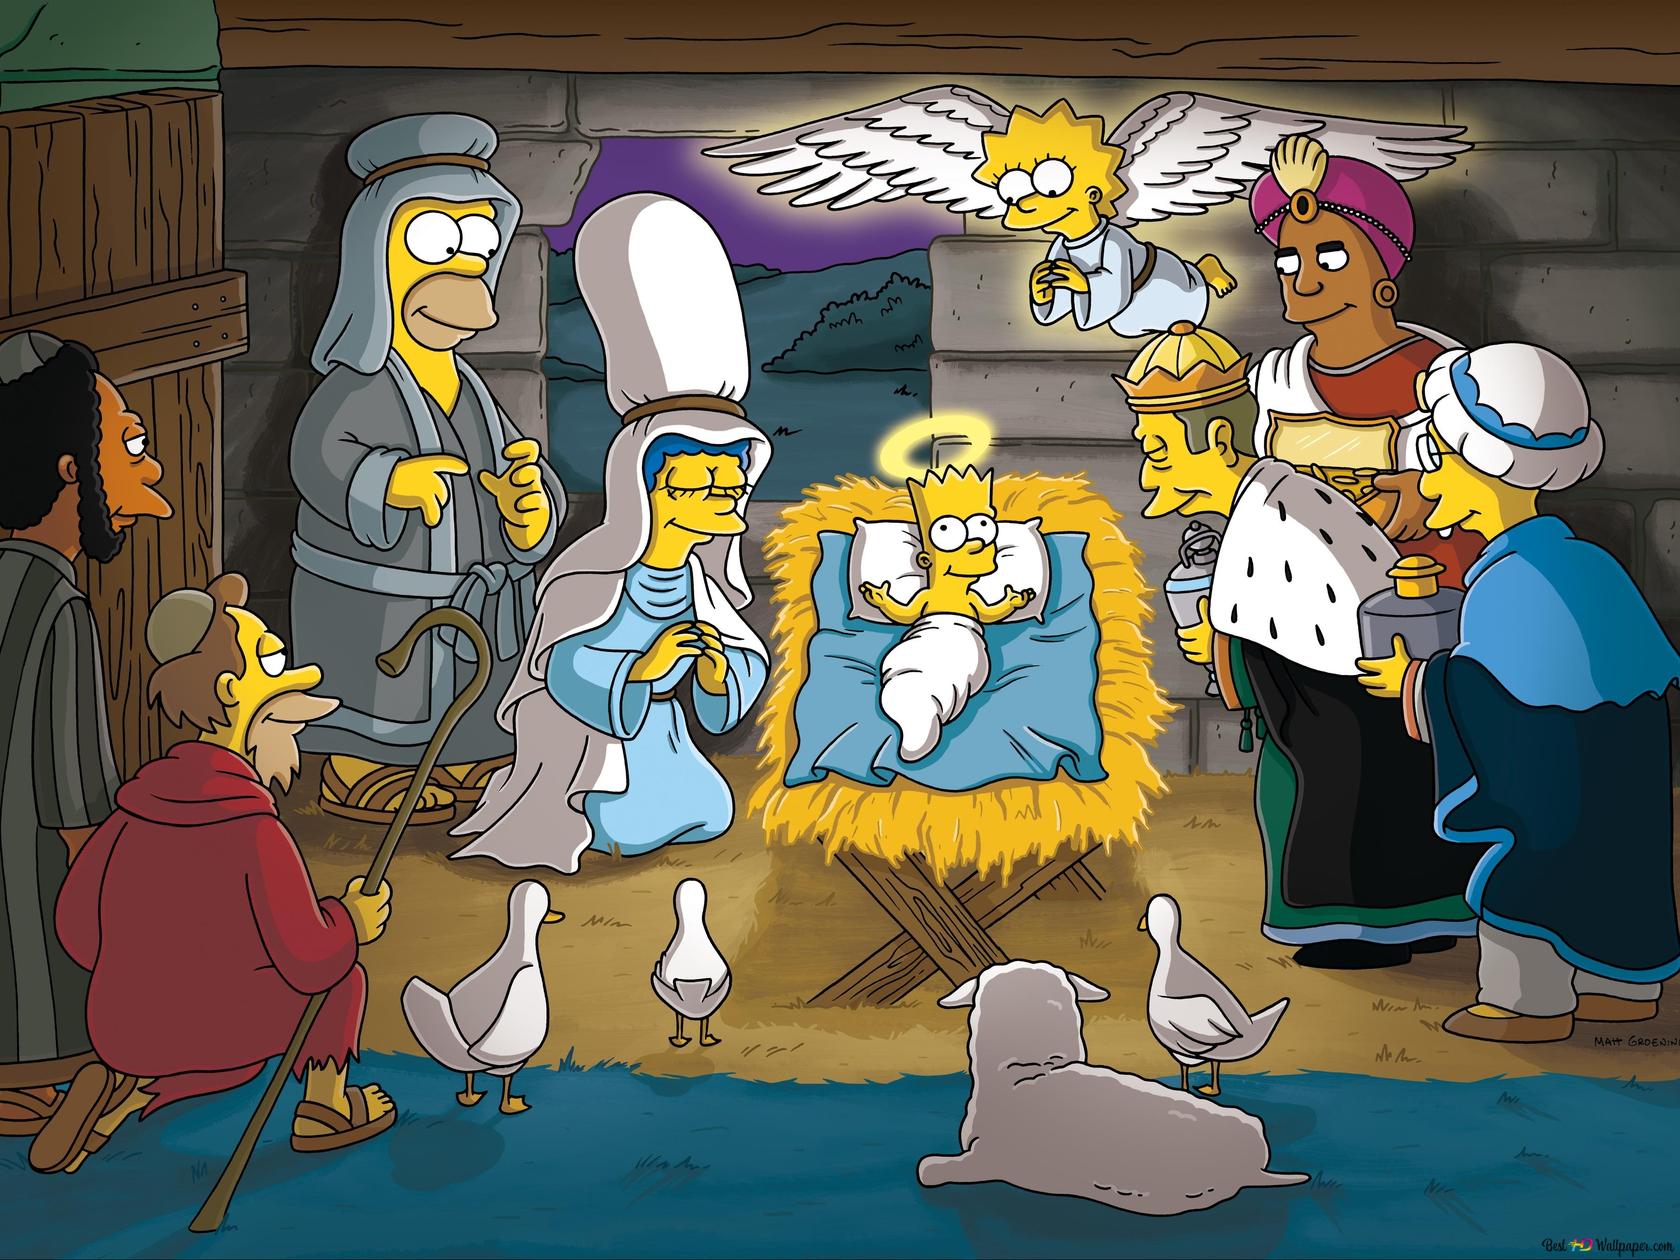 The simpsons nativity scene with a baby jesus - The Simpsons